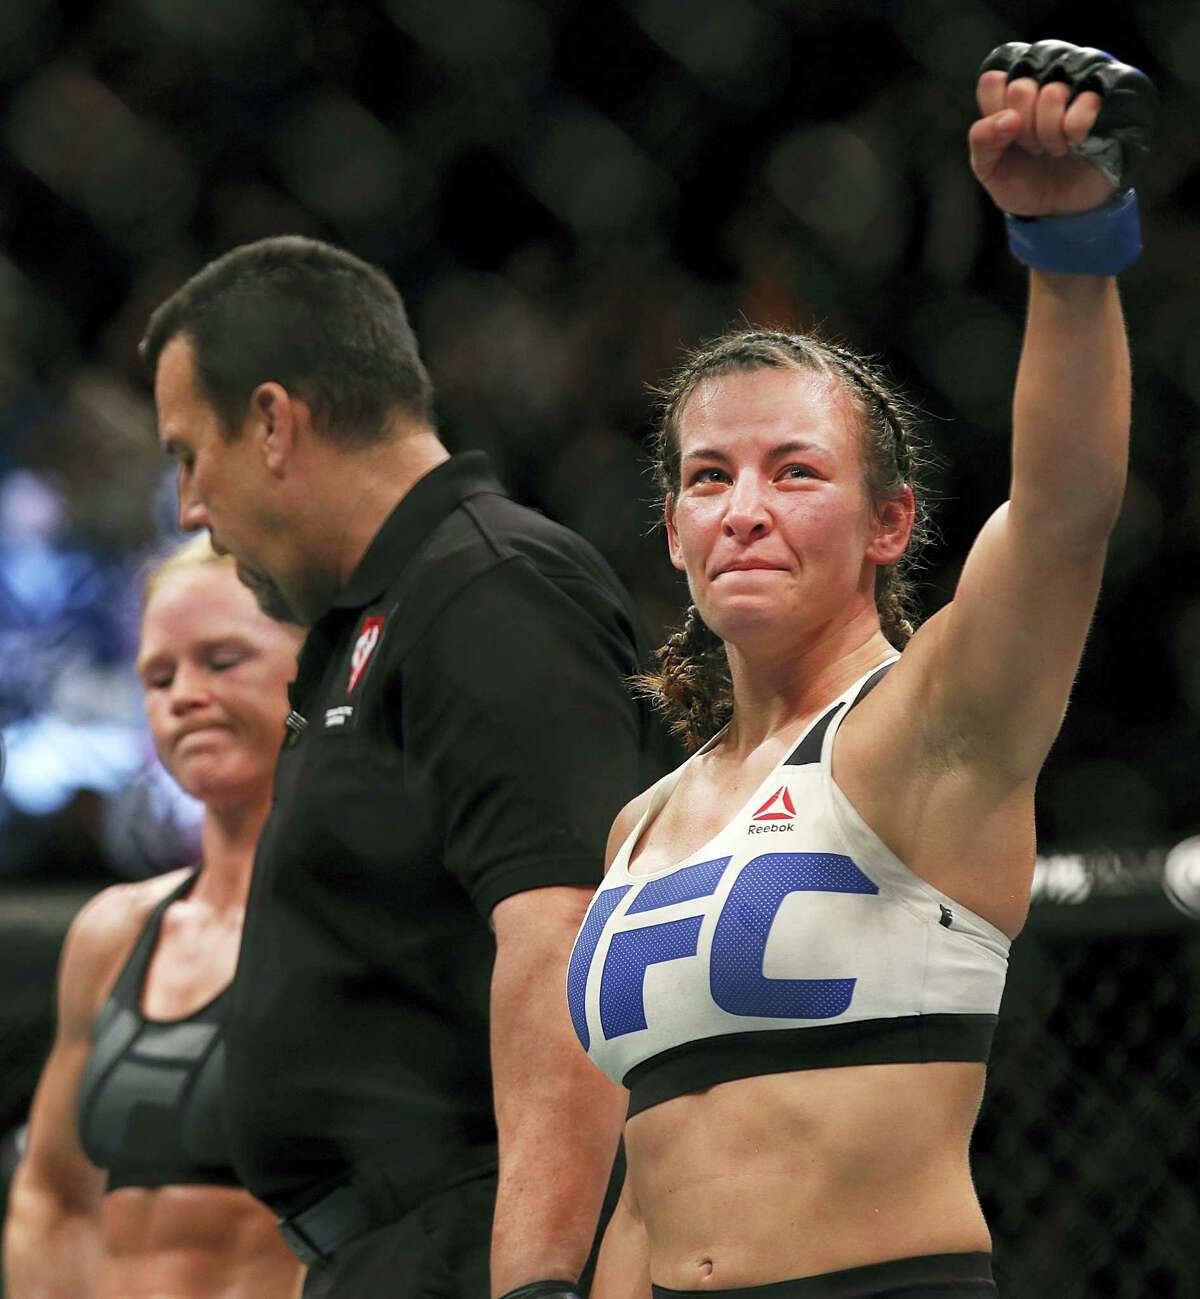 In this March 5, 2016 photo, Miesha Tate, right, celebrates her victory over Holly Holm in a UFC 196 women’s bantamweight mixed martial arts bout in Las Vegas.